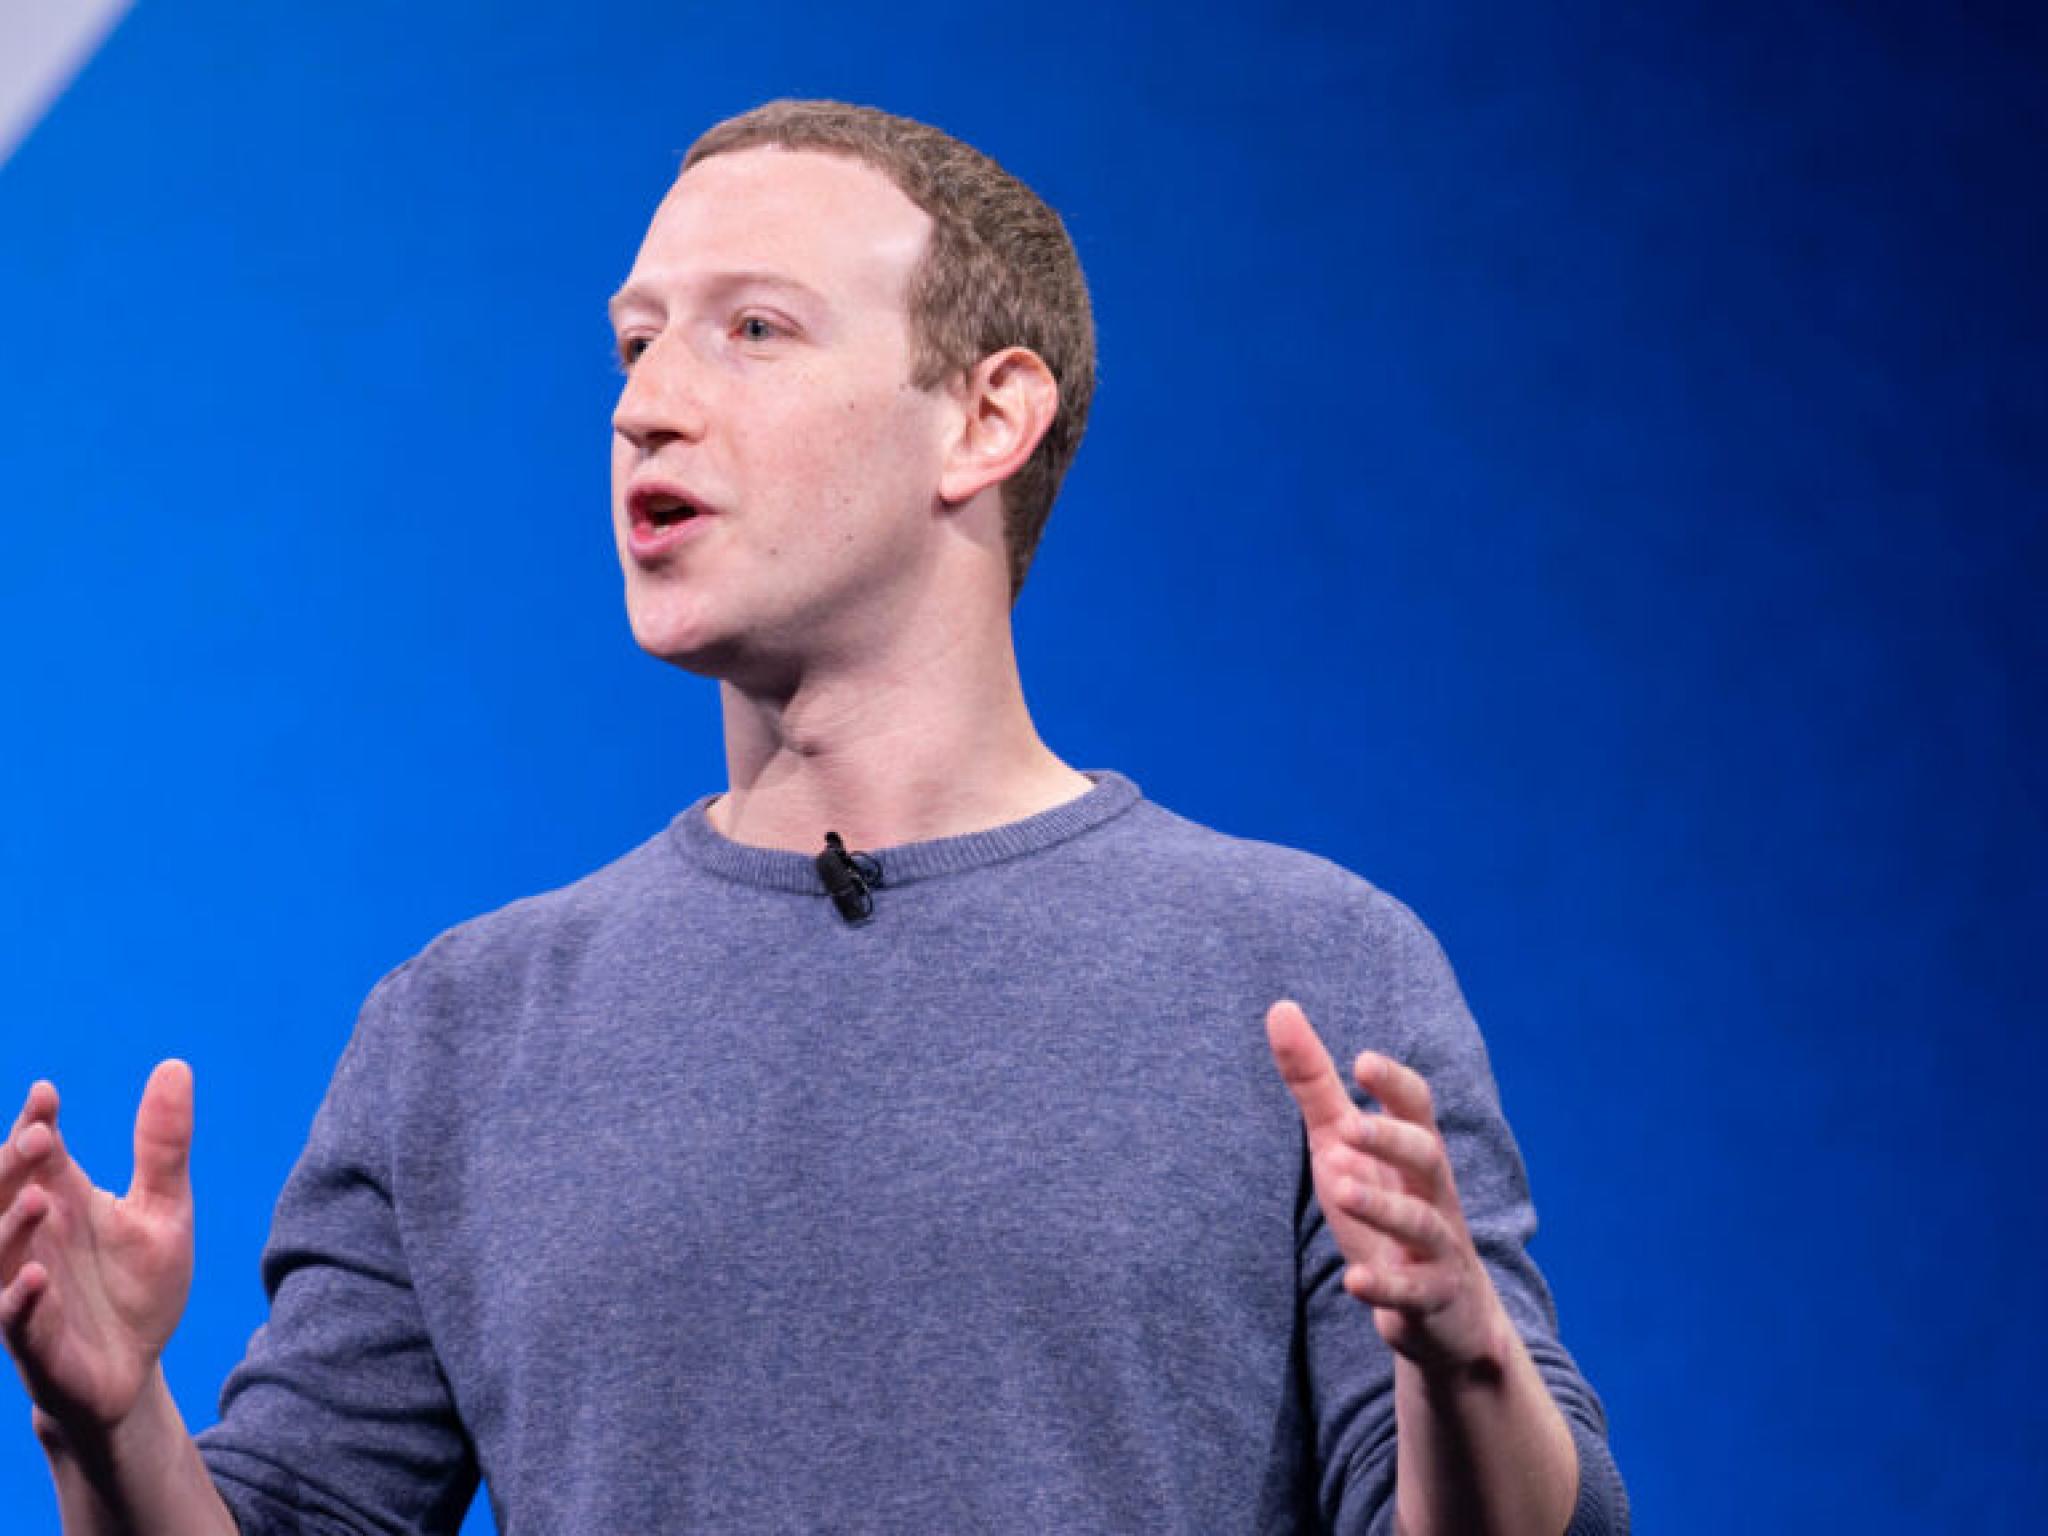  mark-zuckerbergs-pr-team-couldnt-stop-him-from-posting-my-spine-has-been-surgically-removed-said-former-facebook-exec 